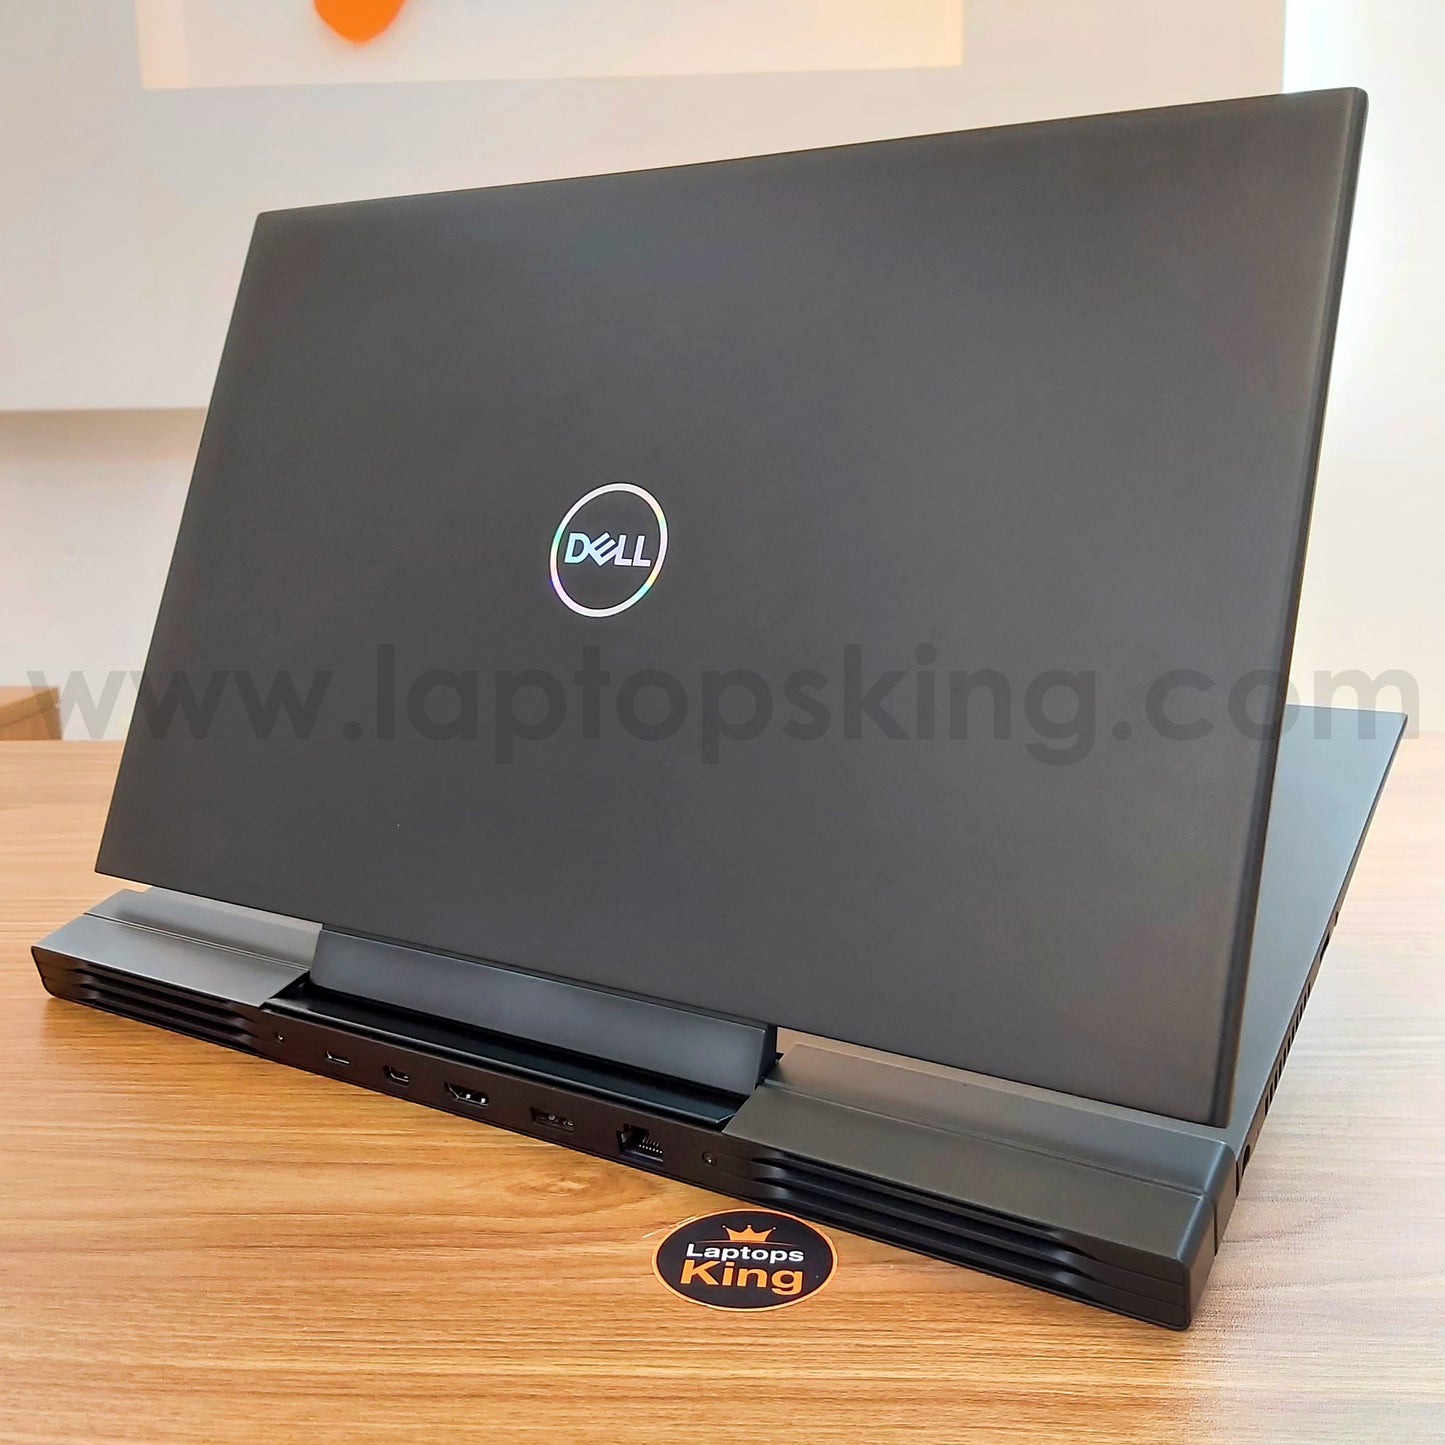 Dell G7 7500 i7-10750h Rtx 2060 4K Gaming Laptop Offers (New Open Box) Gaming laptop, Graphic Design laptop, best laptop for gaming, best laptop for graphic design, computer for sale Lebanon, laptop for video editing in Lebanon, laptop for sale Lebanon, best graphic design laptop,	best video editing laptop, best programming laptop, laptop for sale in Lebanon, laptops for sale in Lebanon, laptop for sale in Lebanon, buy computer Lebanon, buy laptop Lebanon.